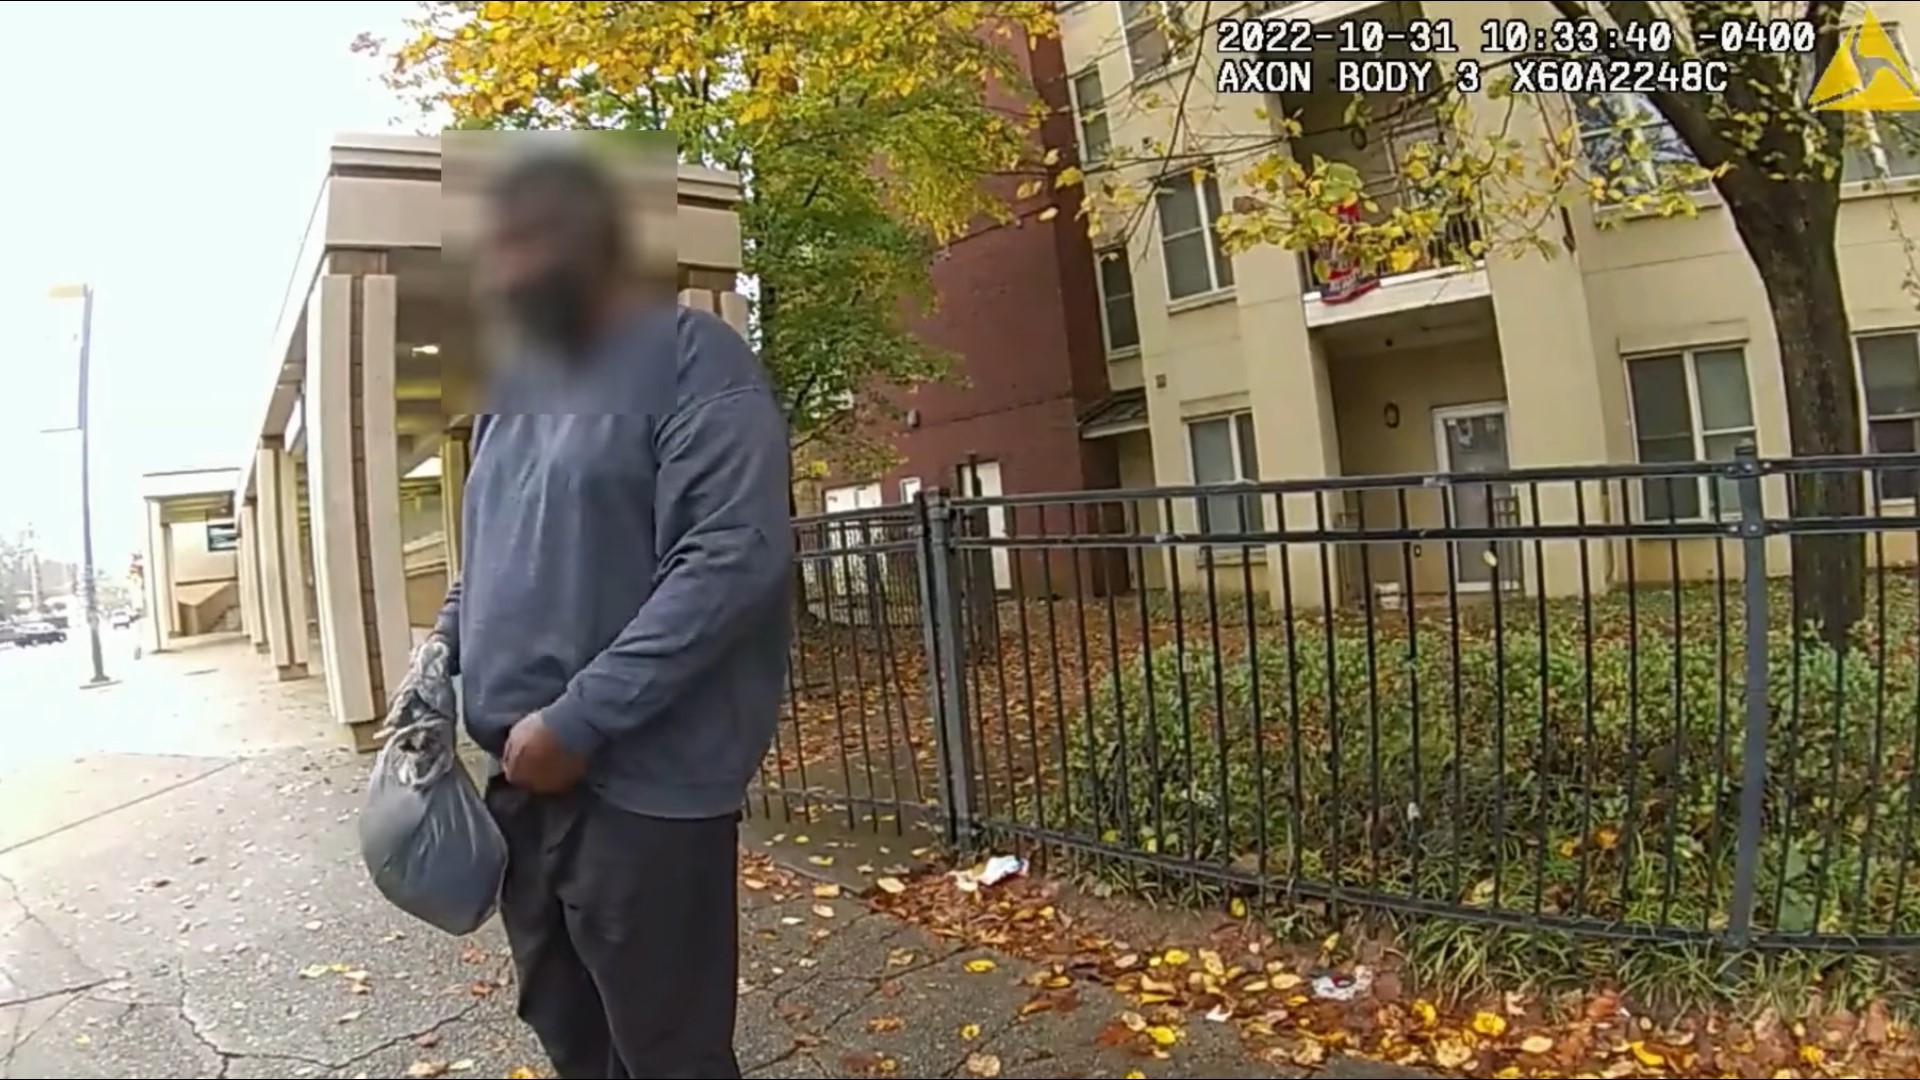 On Halloween, an Atlanta Police officer's bodycam video captured a moment of humanity and compassion.